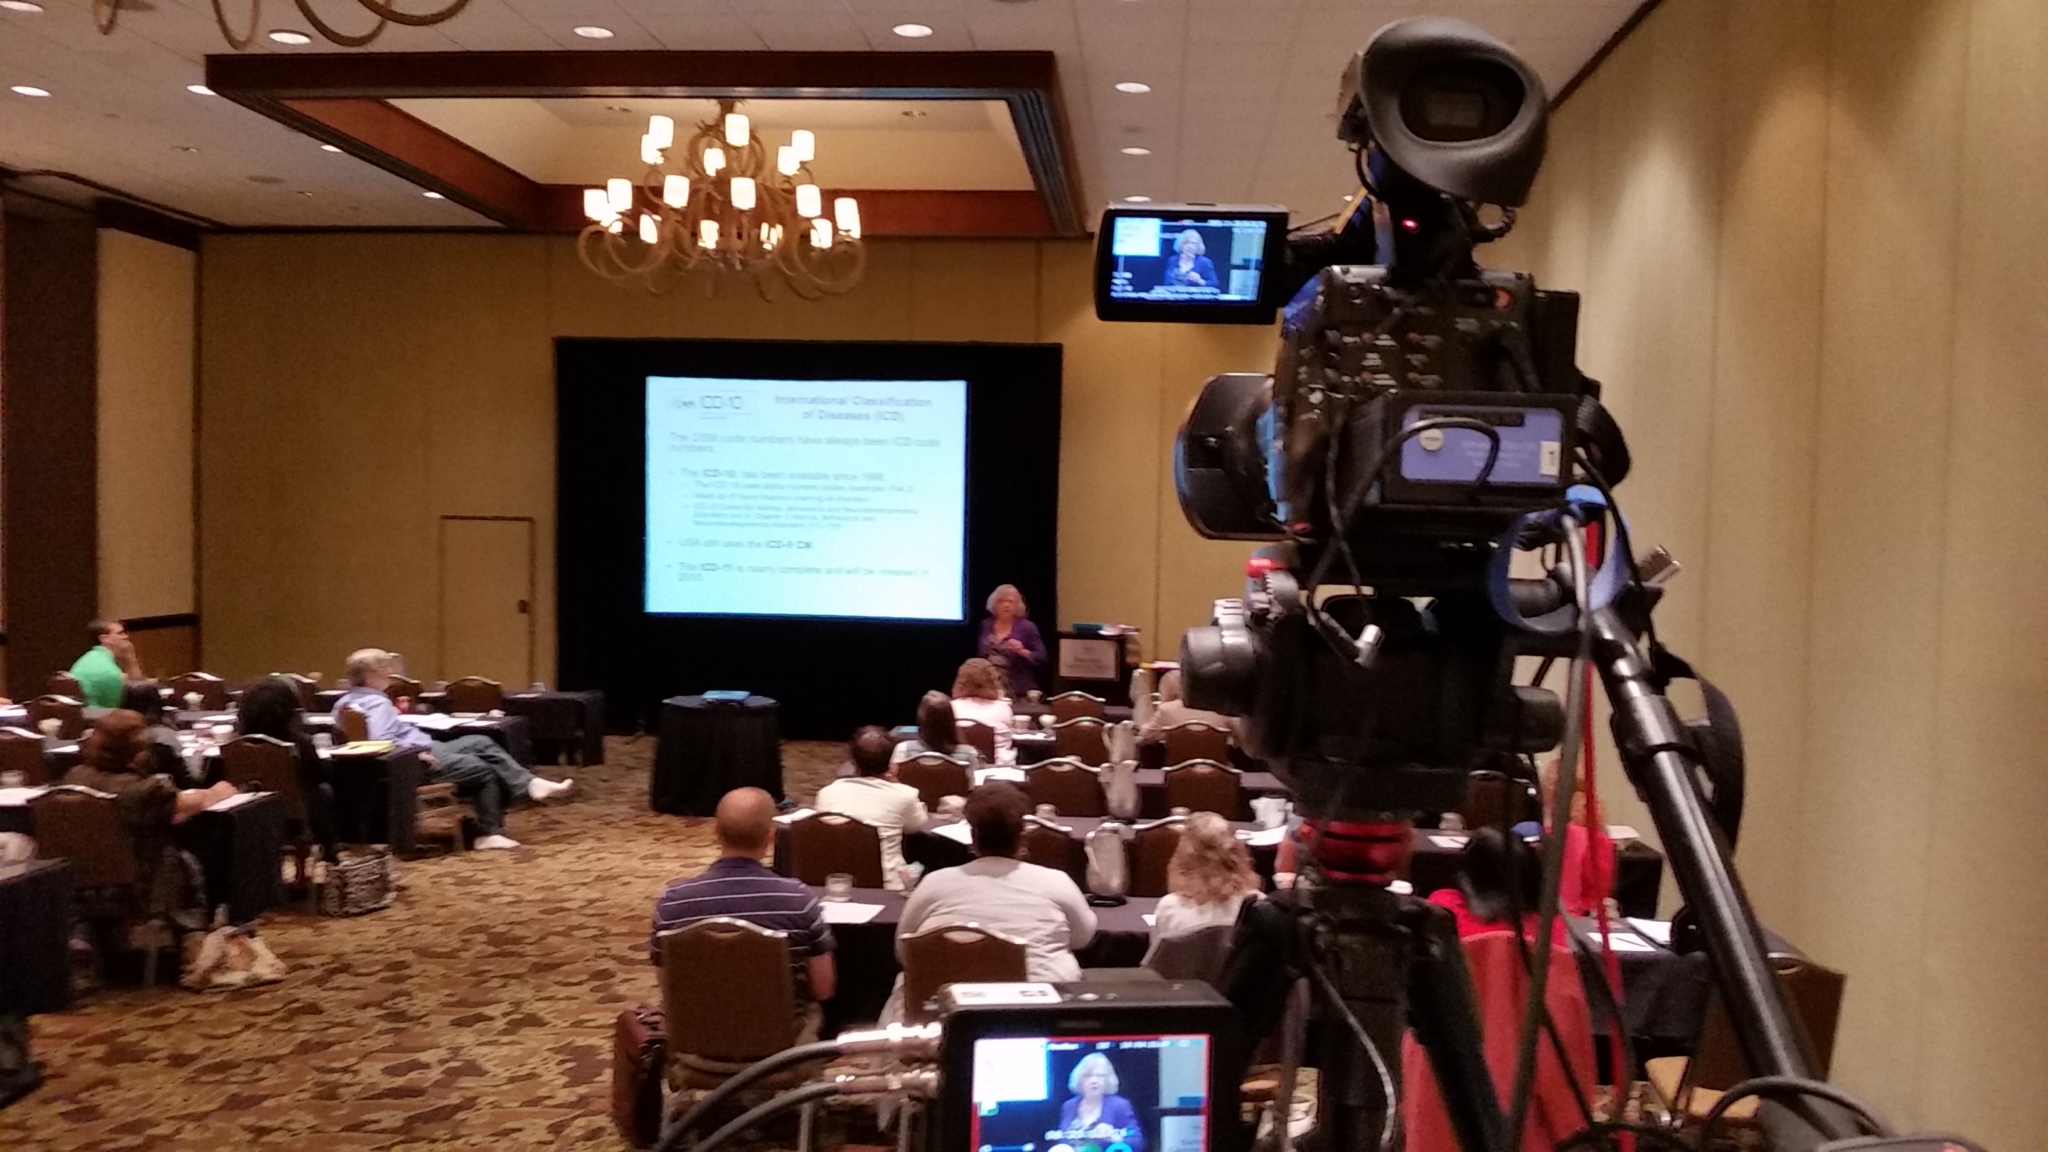 View from behind the camera at PESI Healthcare's continuing education event